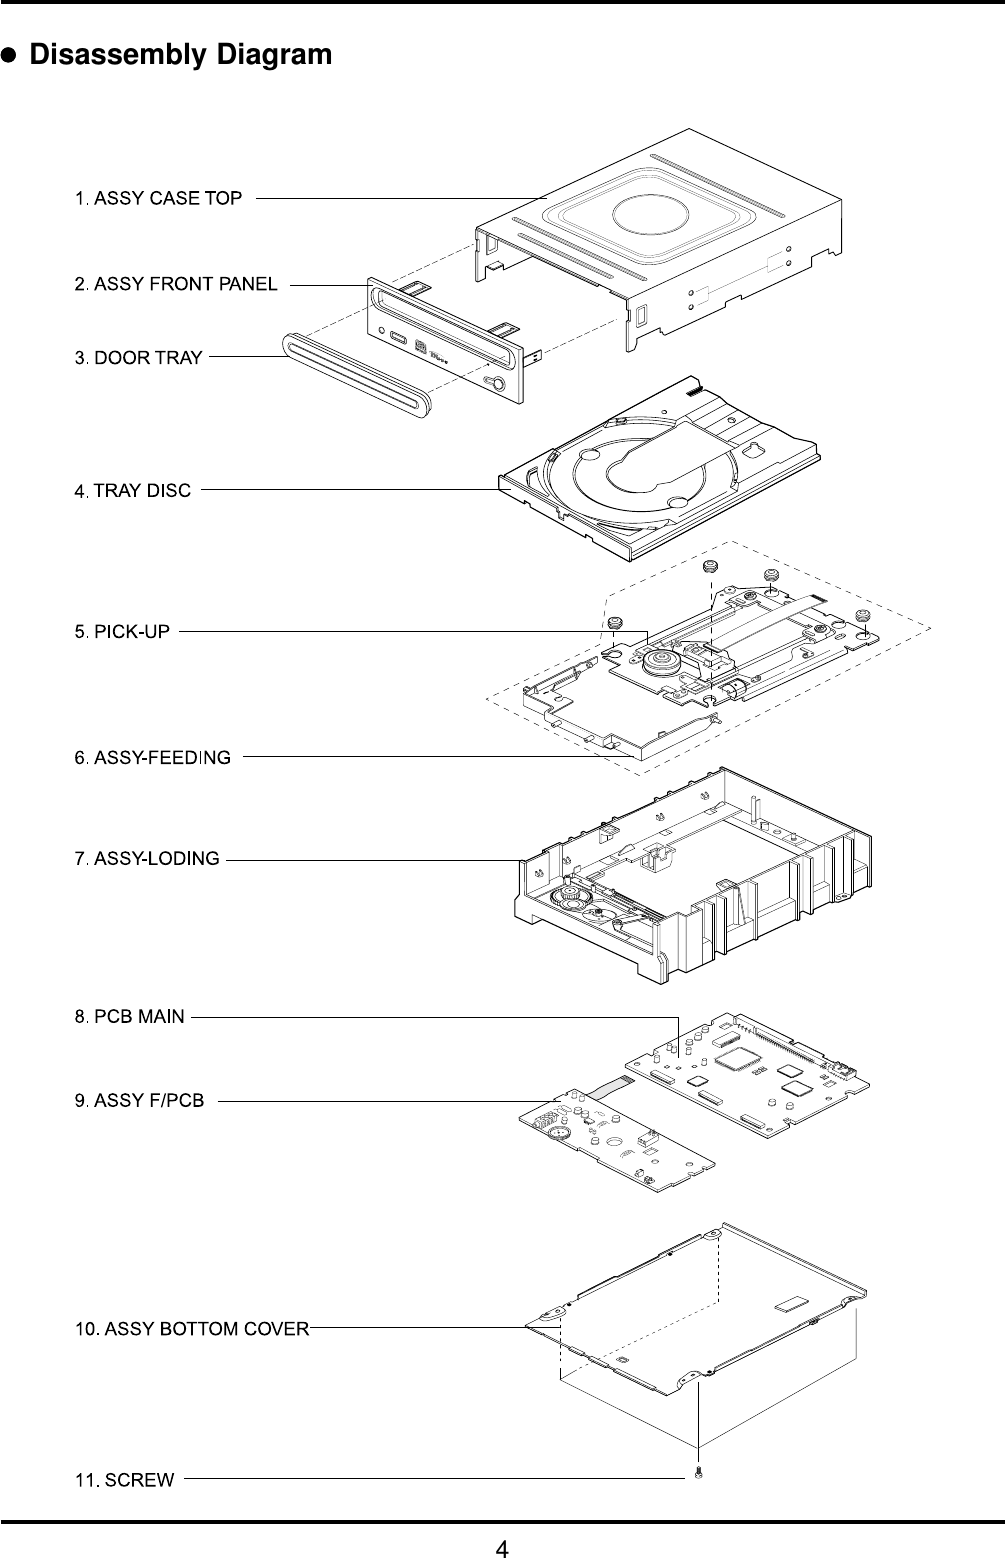 4Disassembly Diagram 